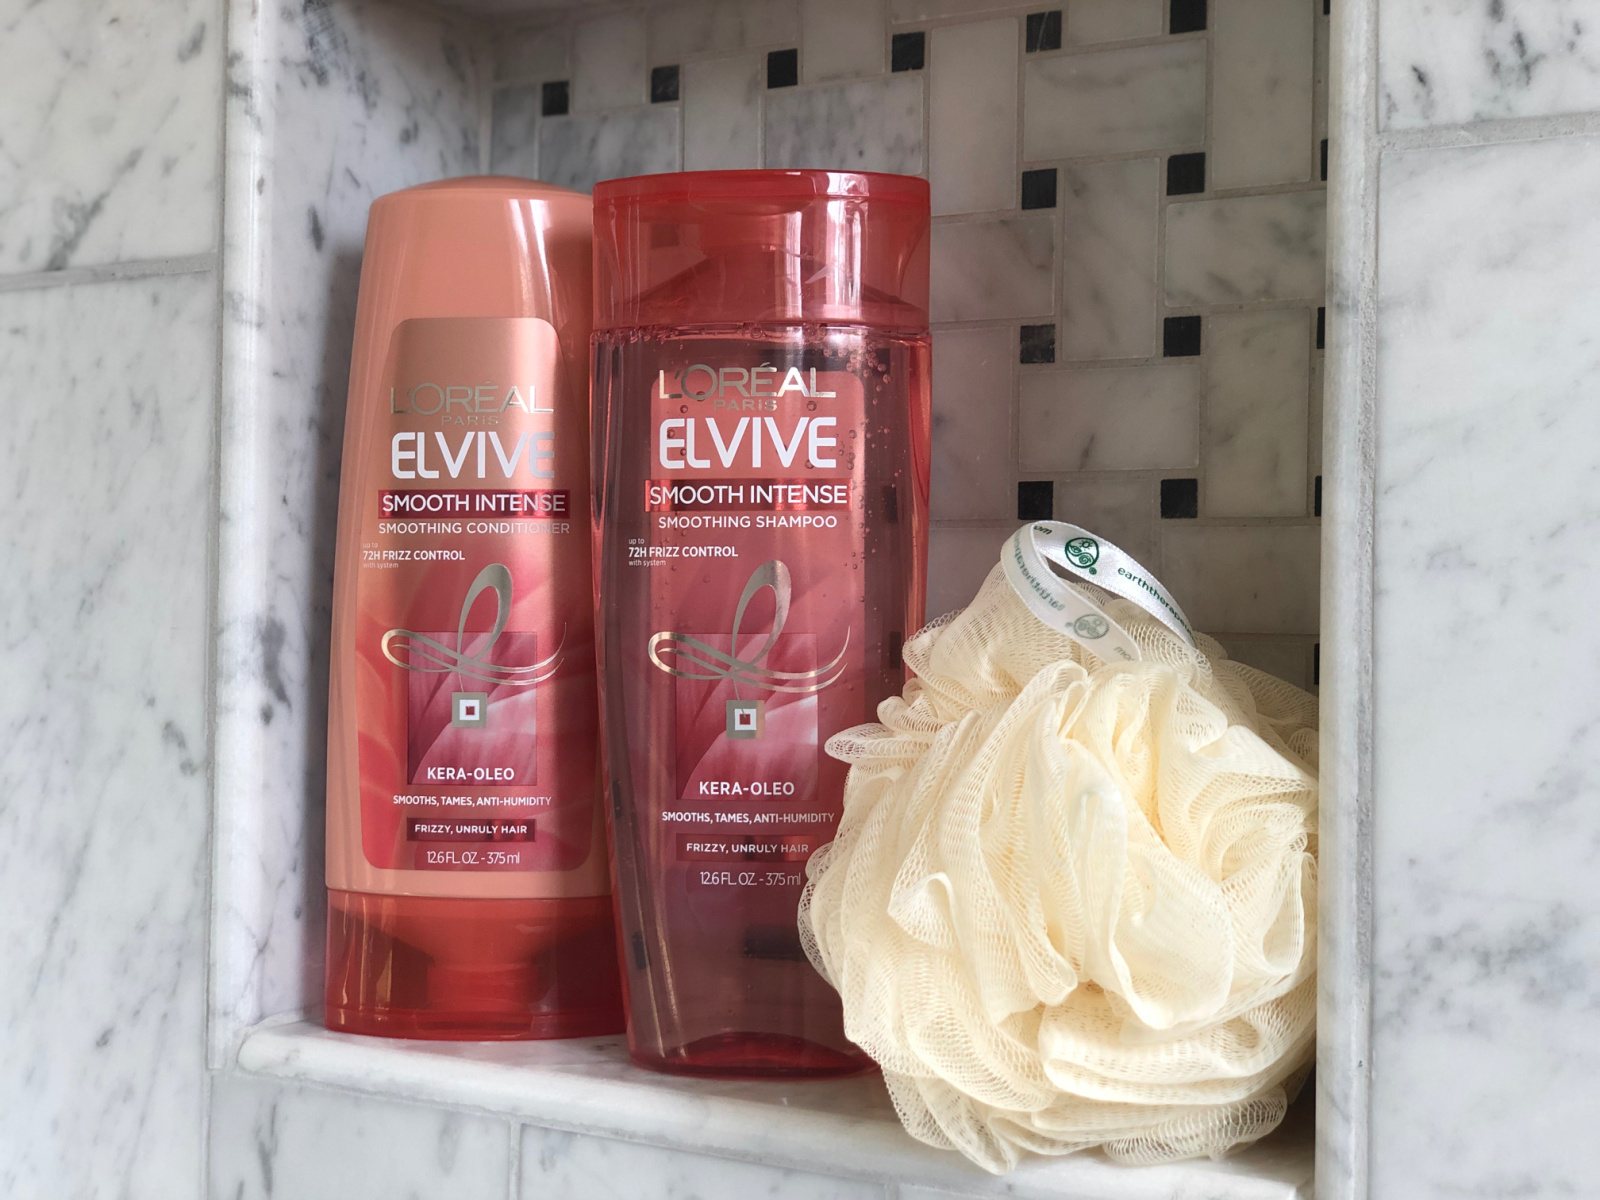 L’Oreal Elvive Haircare Just $1.99 Per Bottle At Kroger